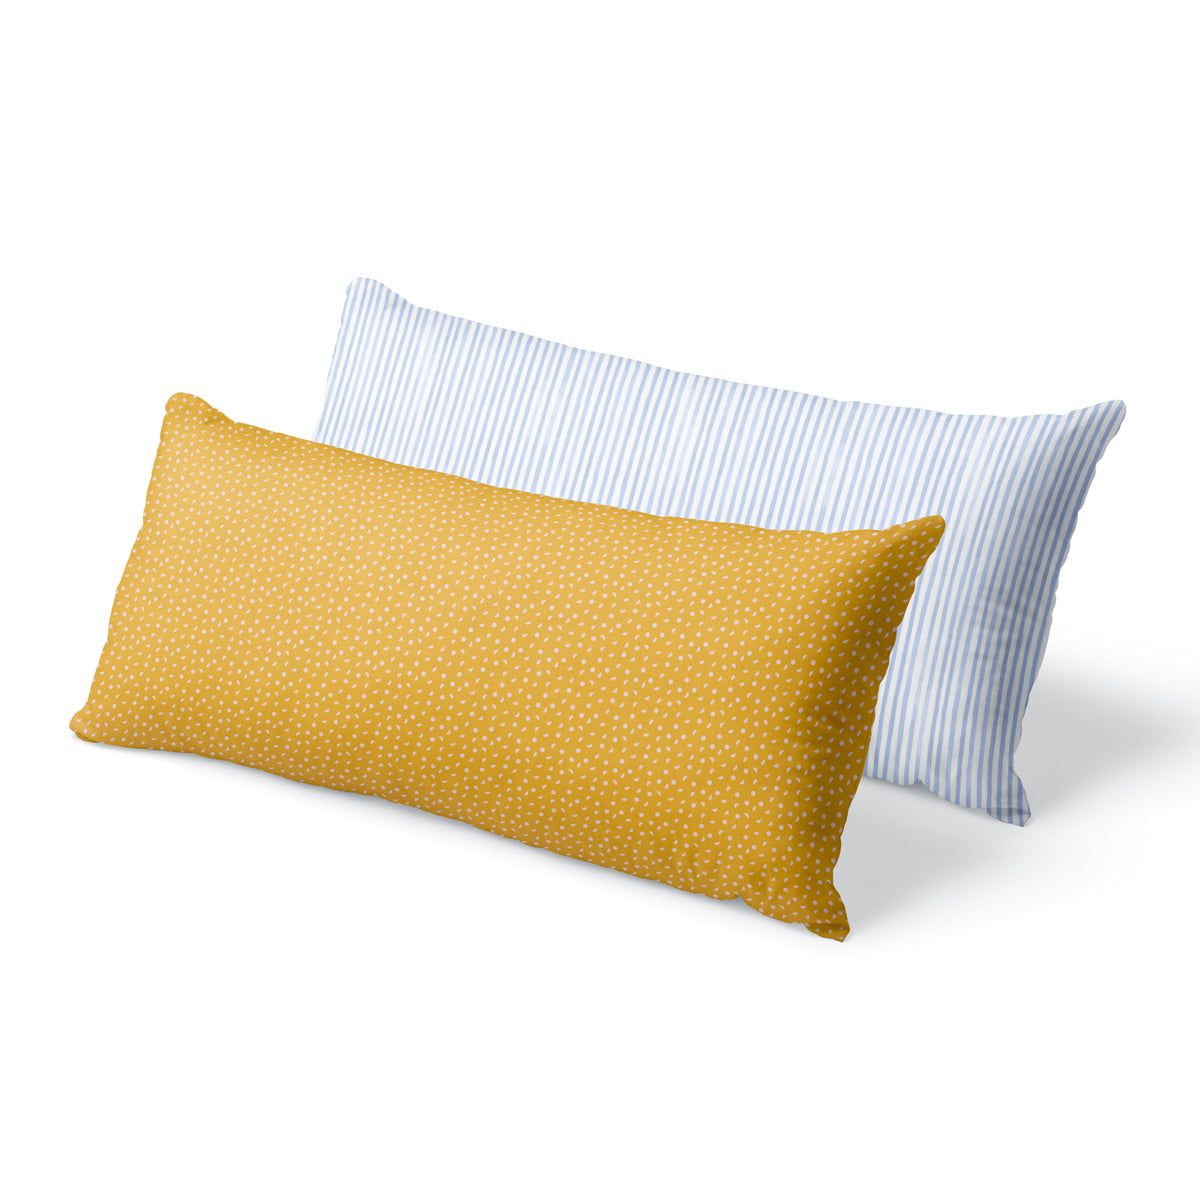 Two king size silk pillowcases - Luna Dot and Simple Stripe